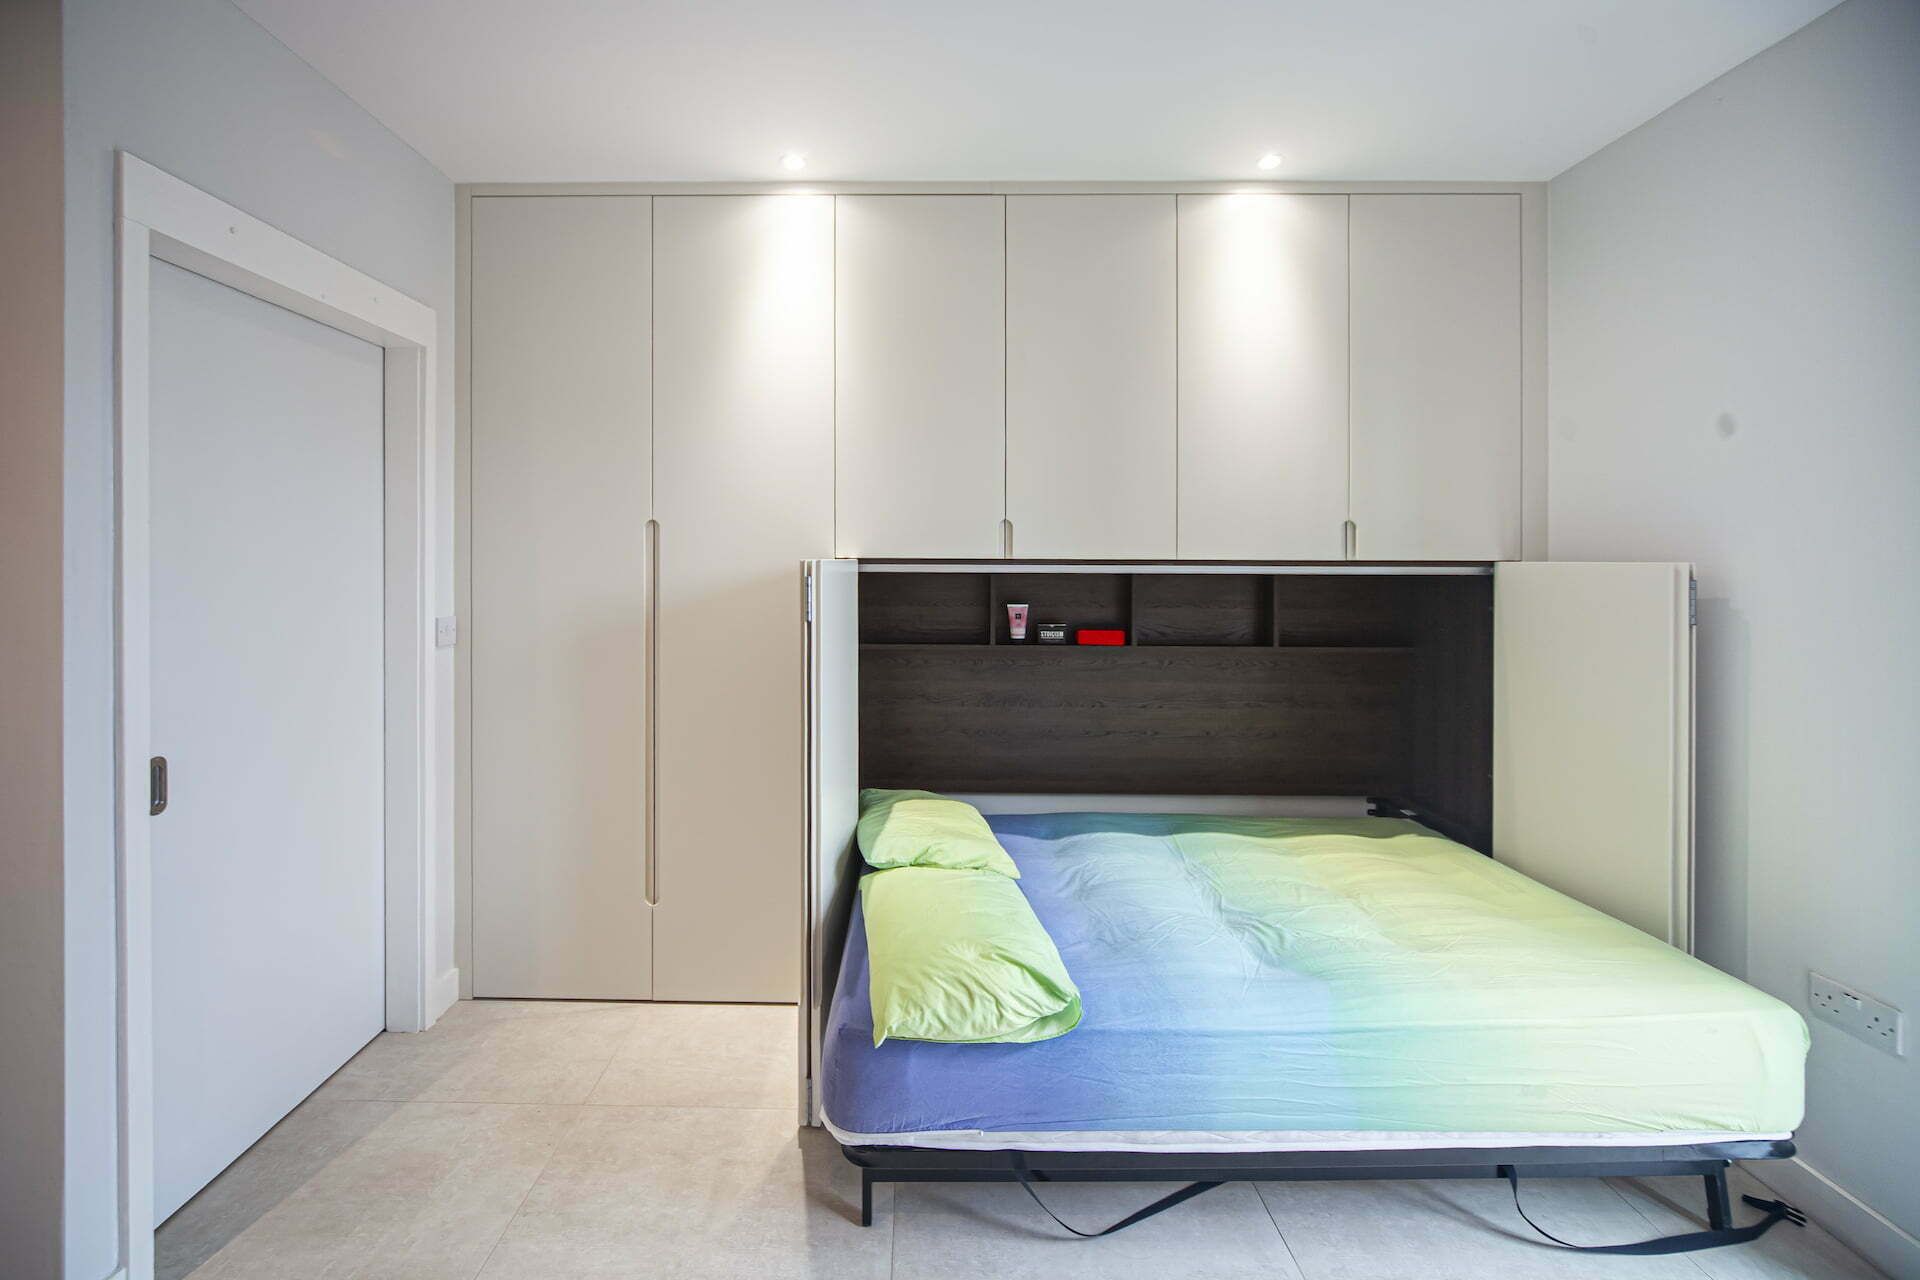 Folding Bespoke Wall Beds – Custom Made Bed Built Into Wall, Pull Down  Murphy Bed | Urban Wardrobes Intended For Wardrobes Beds (View 15 of 15)